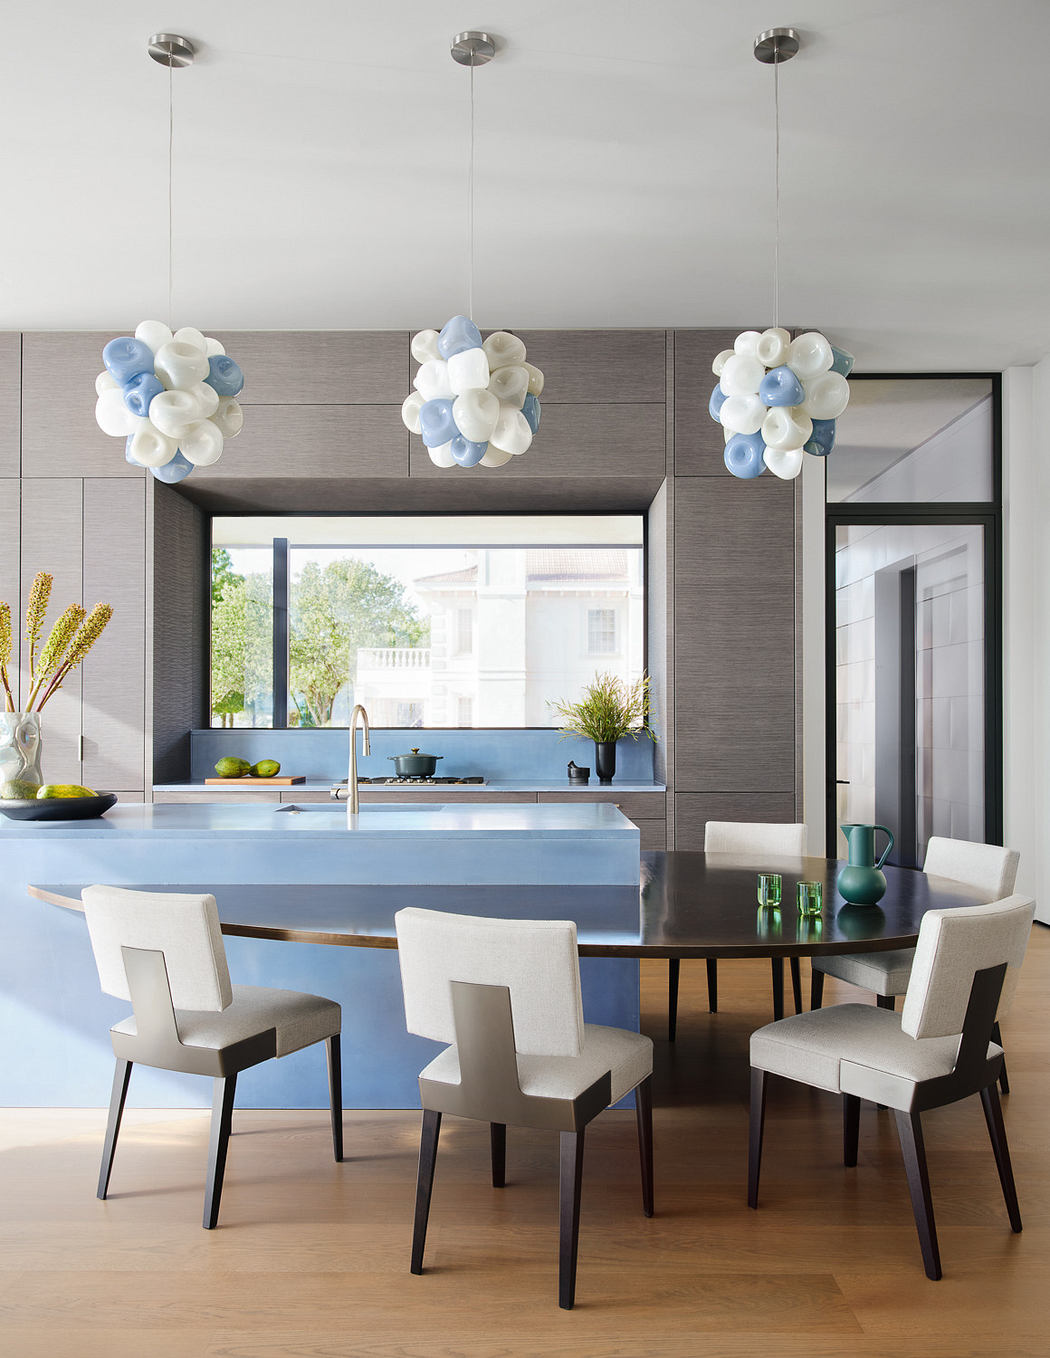 Modern kitchen with blue island, dining table, unique pendant lights, and neutral tones